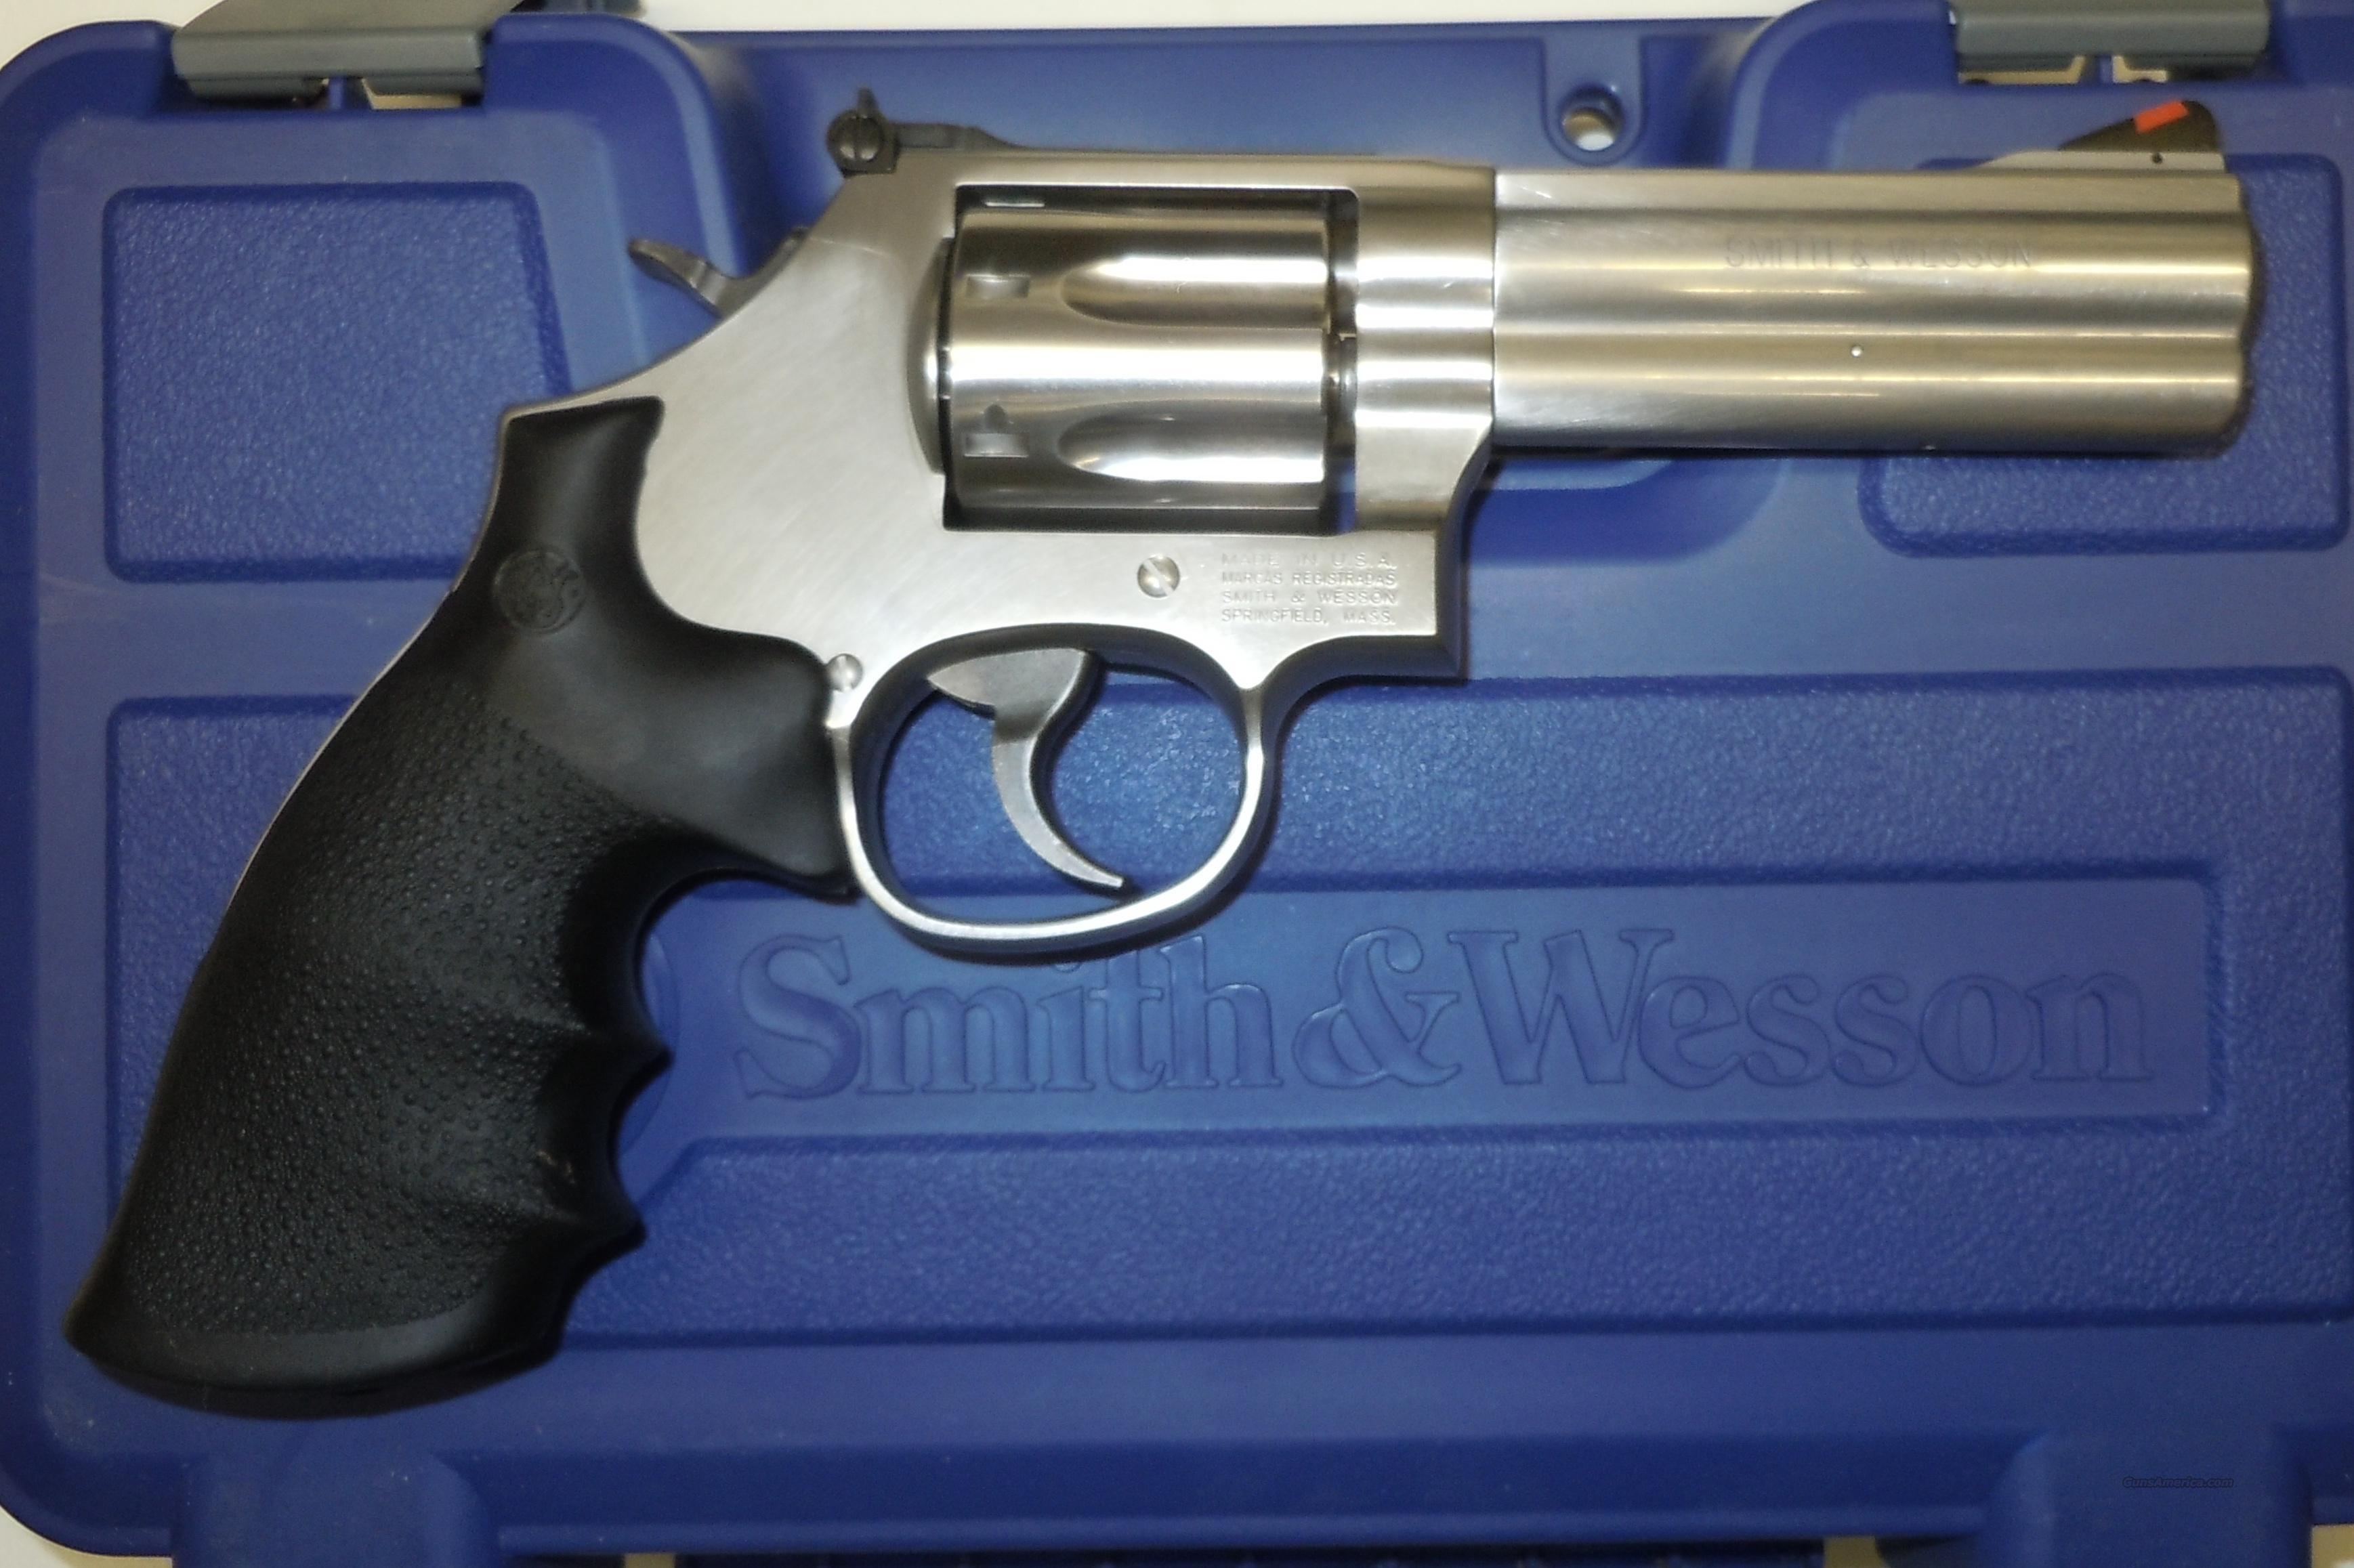 HQ Smith & Wesson 357 Magnum Revolver Wallpapers | File 602.65Kb